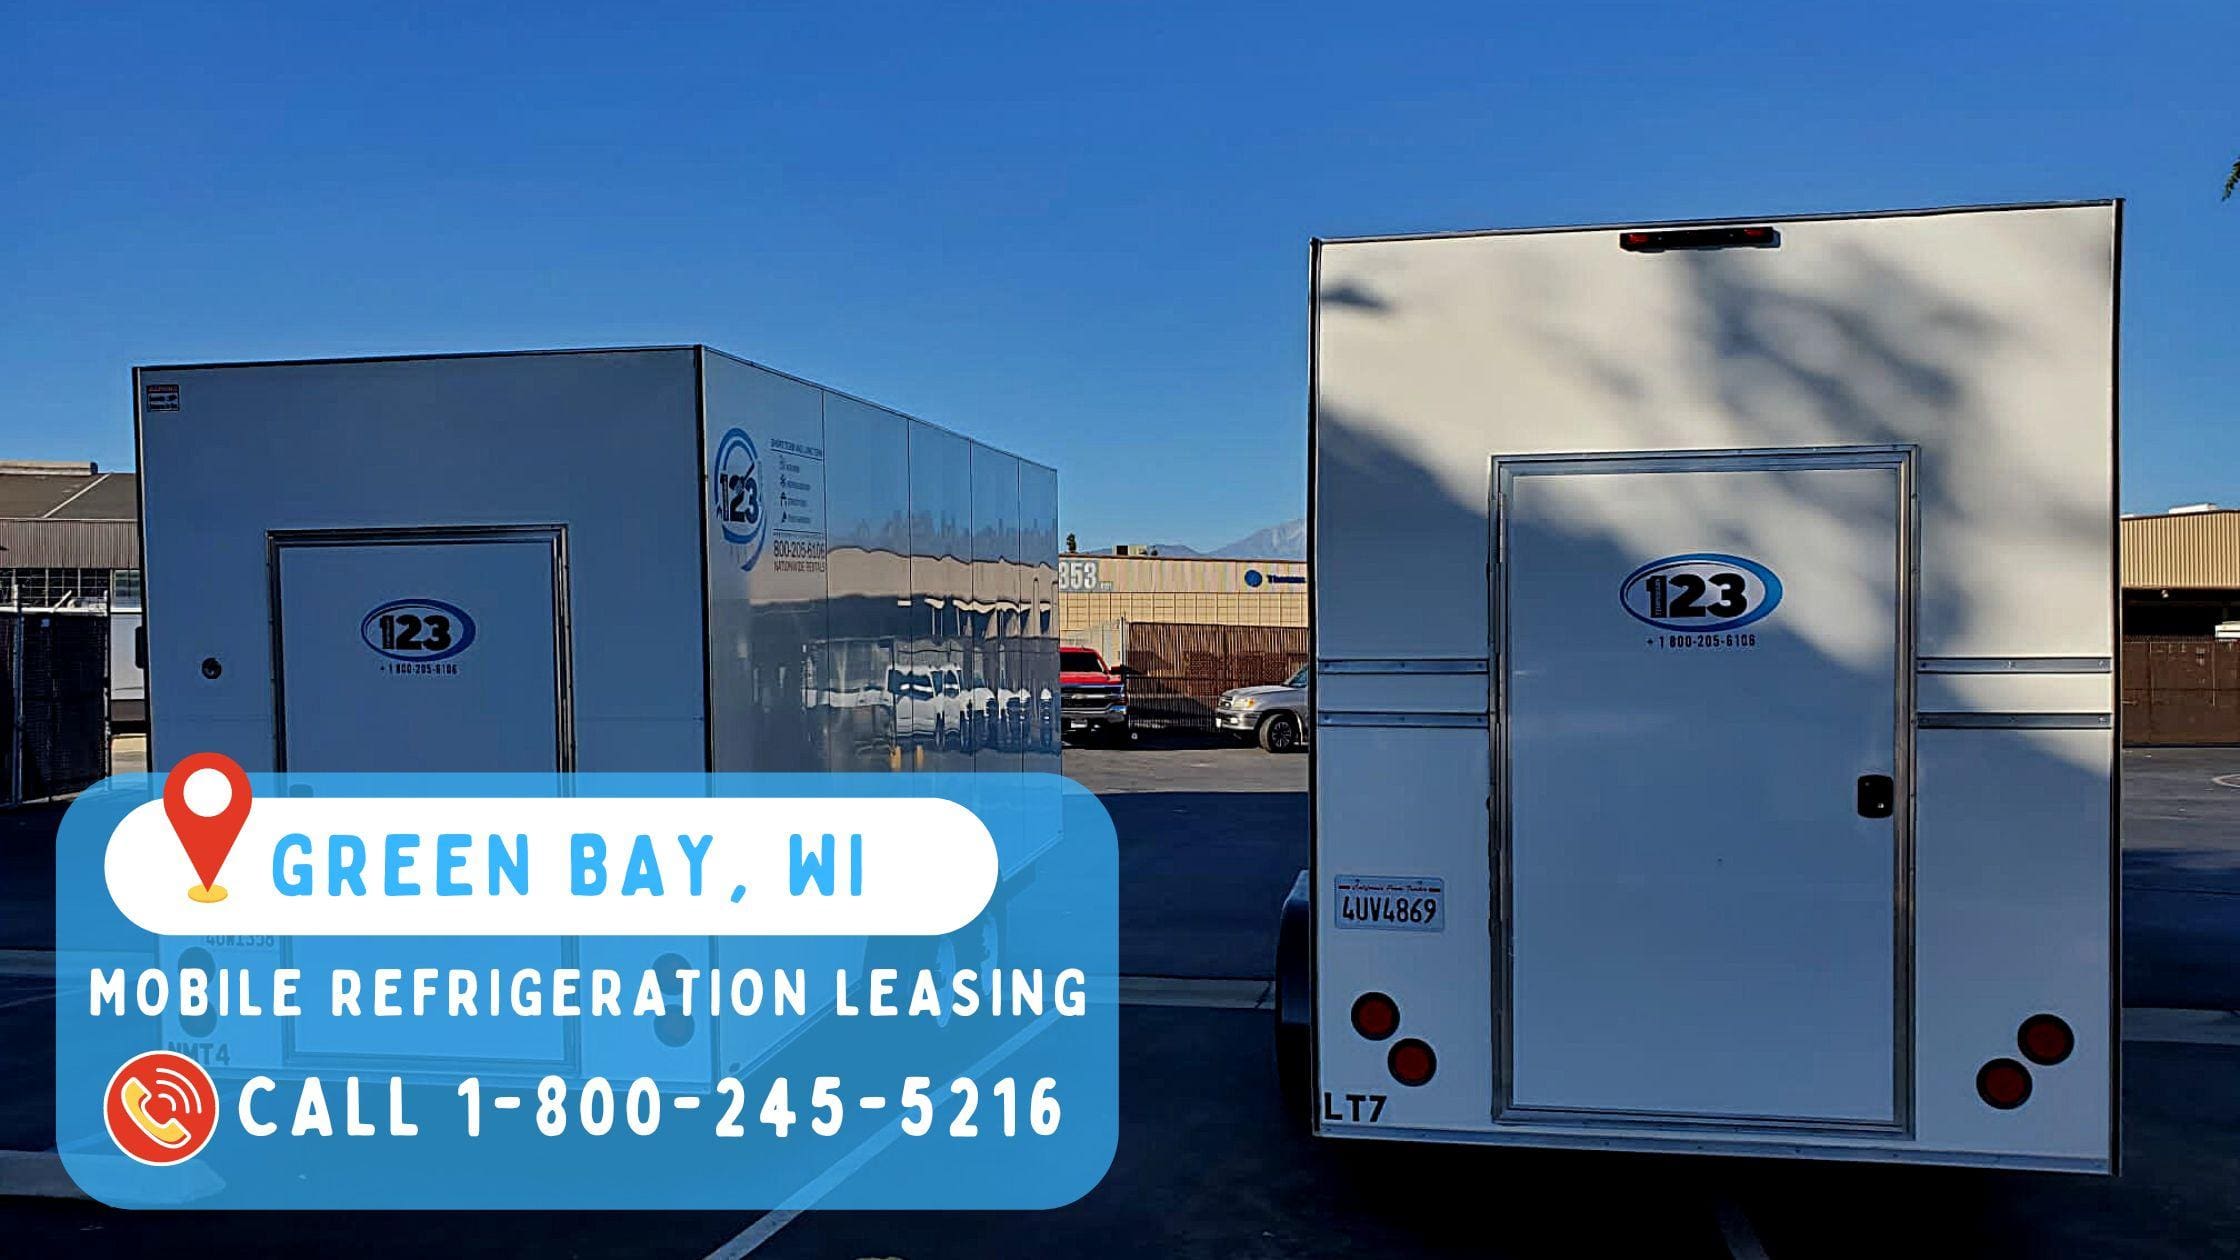 Mobile Refrigeration Leasing in Green Bay